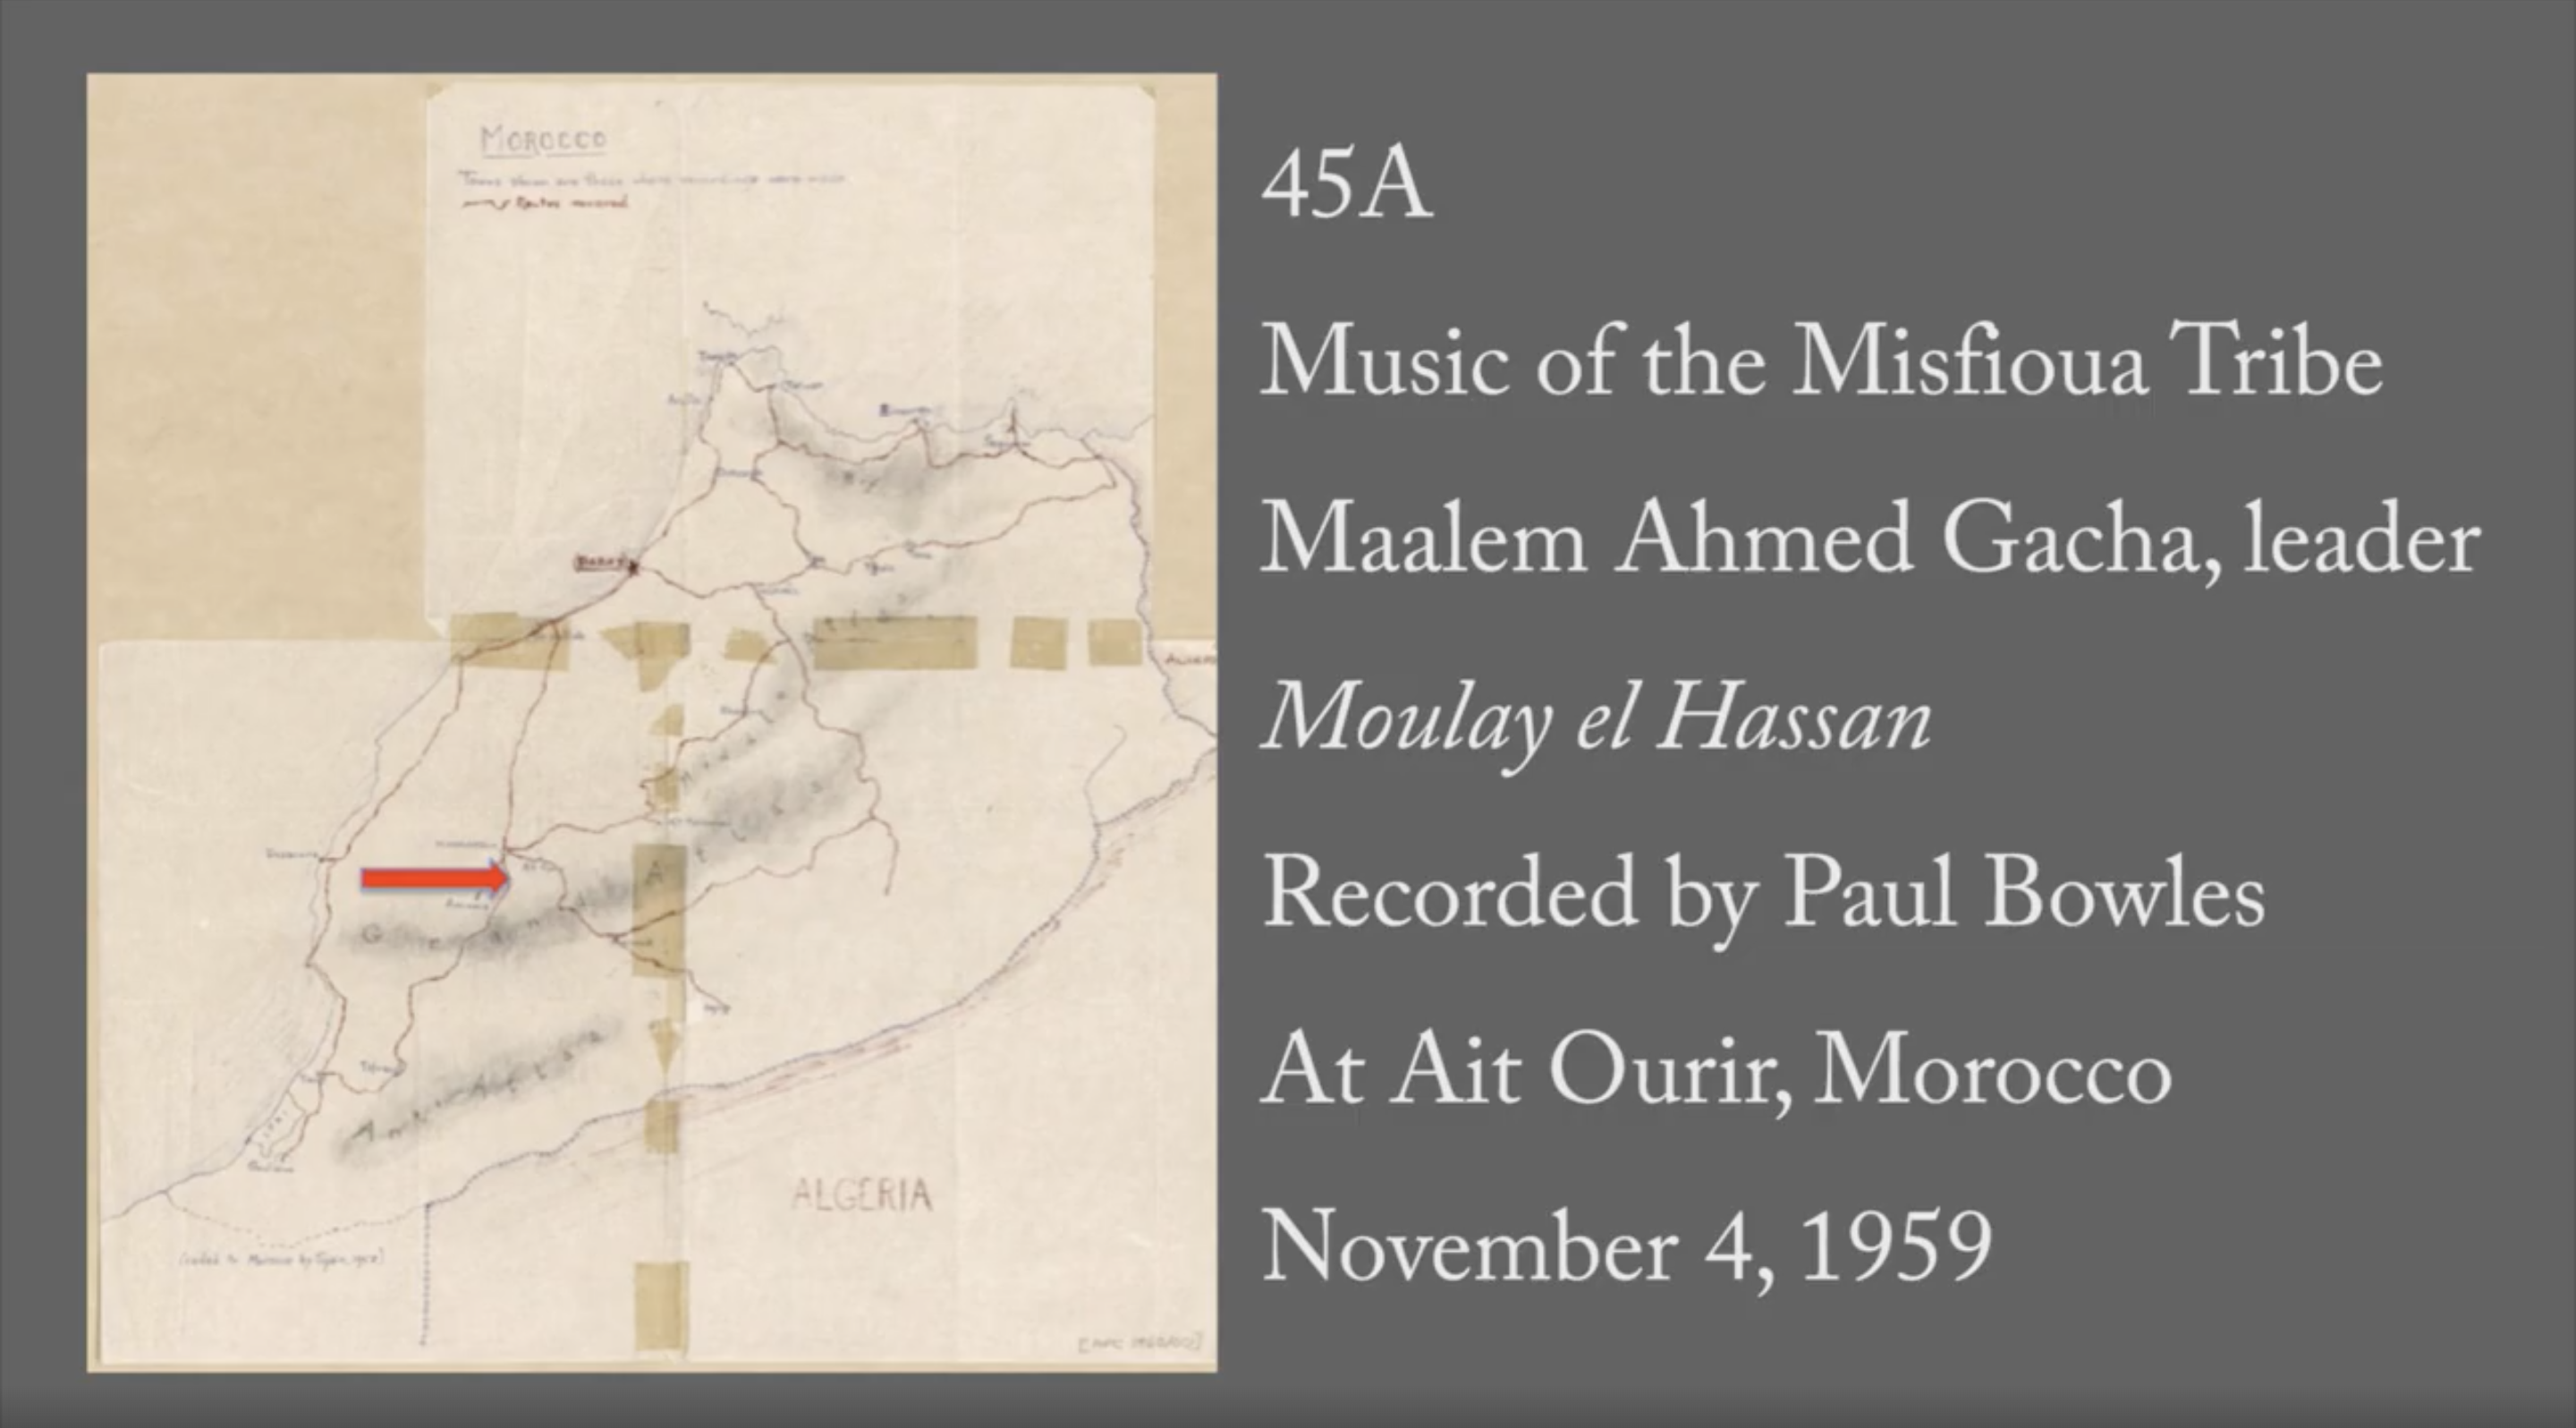 45A: "Moulay el Hassan" (Music of the Misfioua Tribe)